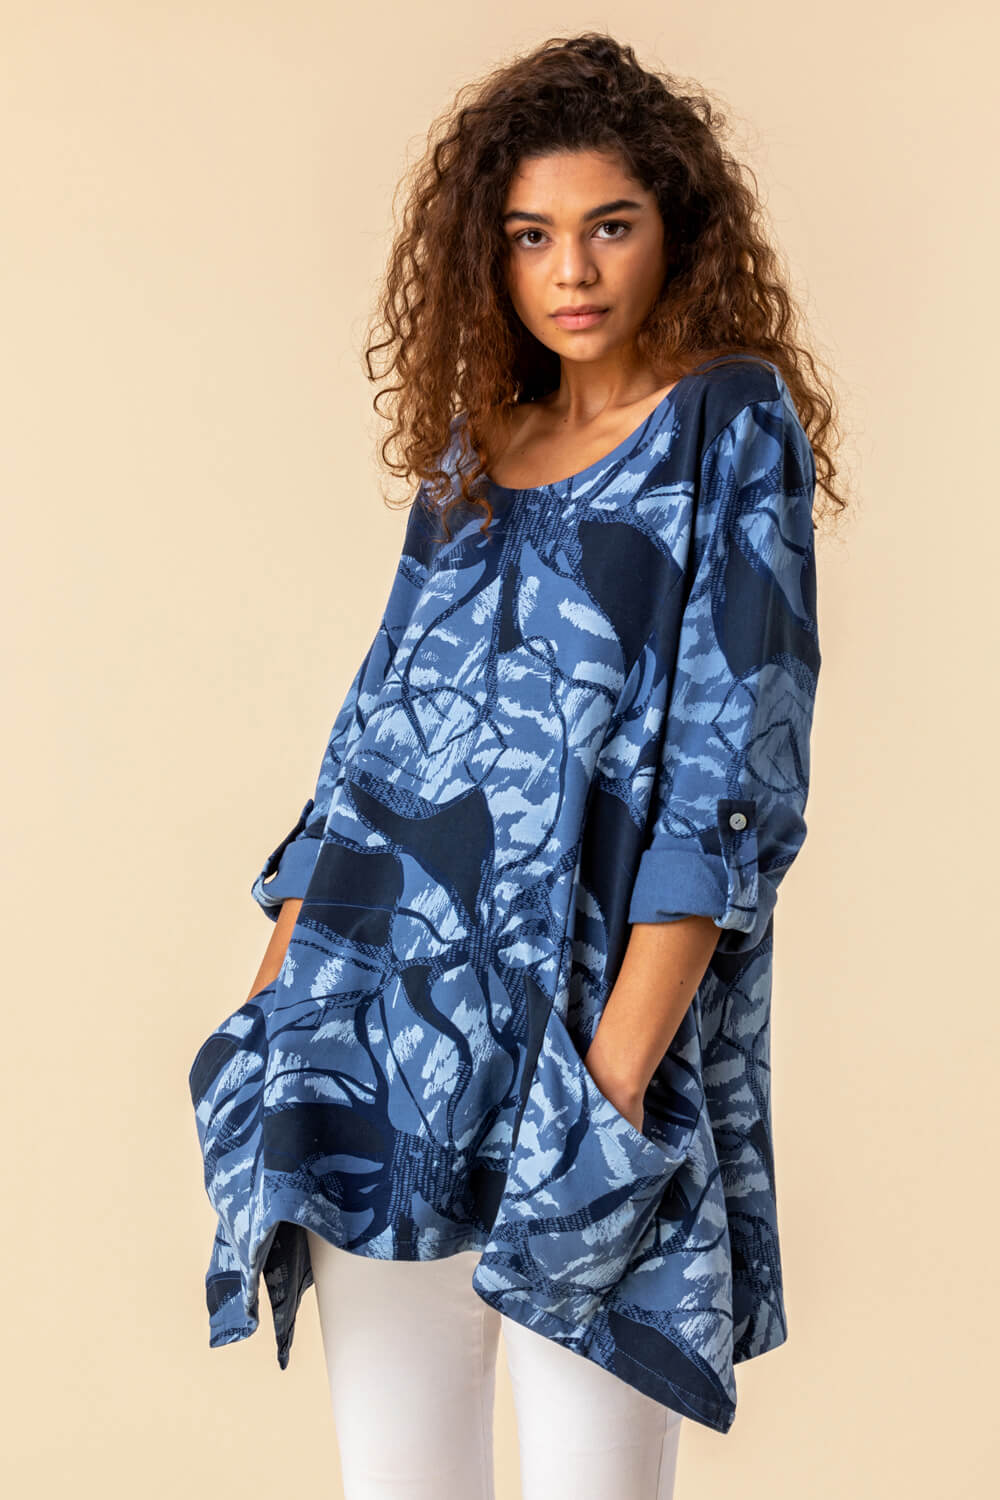 Abstract Print Tunic Top with Pockets in Denim Blue - Roman Originals UK